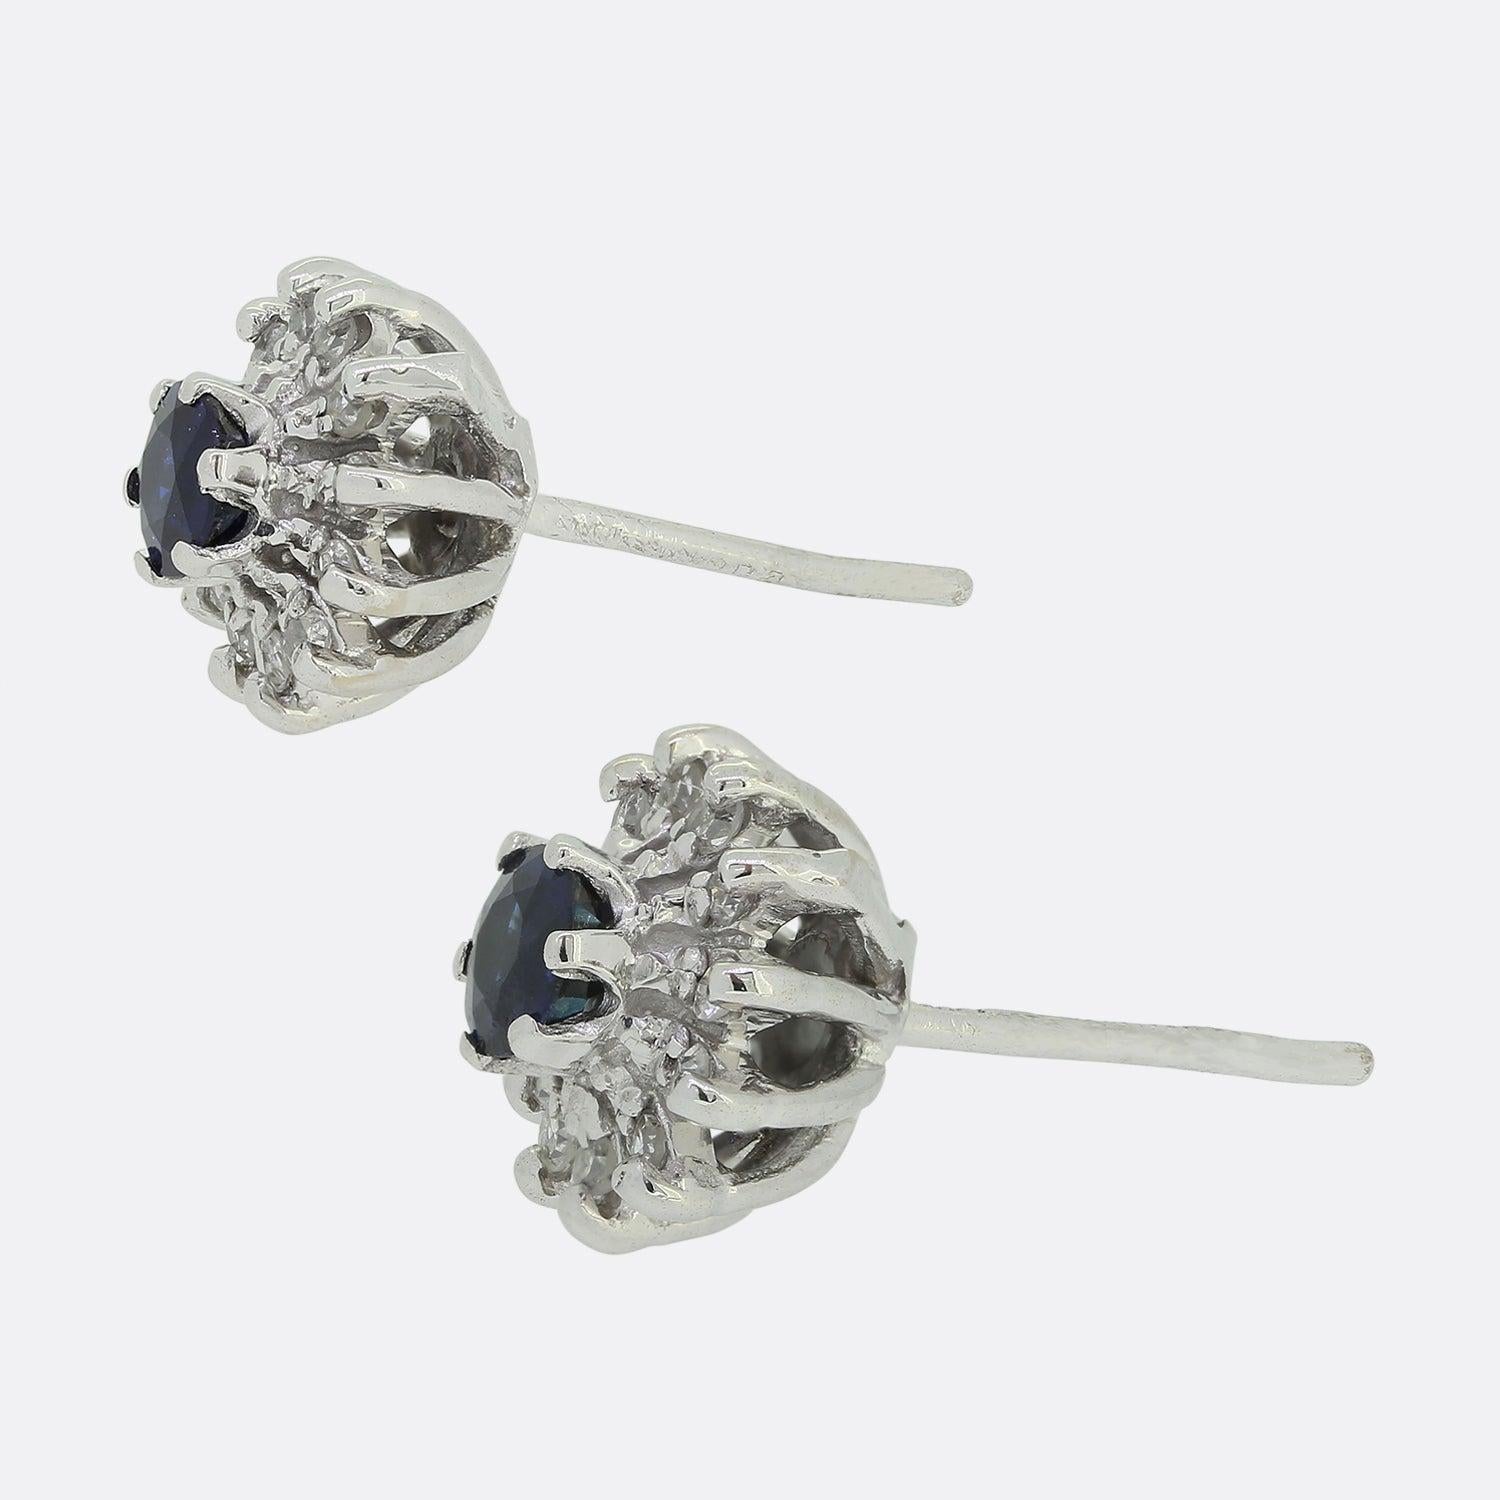 Here we have vintage pair of 18ct sapphire and diamond earrings. Each white gold mount plays host to a centralised, slightly risen round sapphire possessing a rich deep blue iridescent hue. This principle stone is then surrounded by an array of